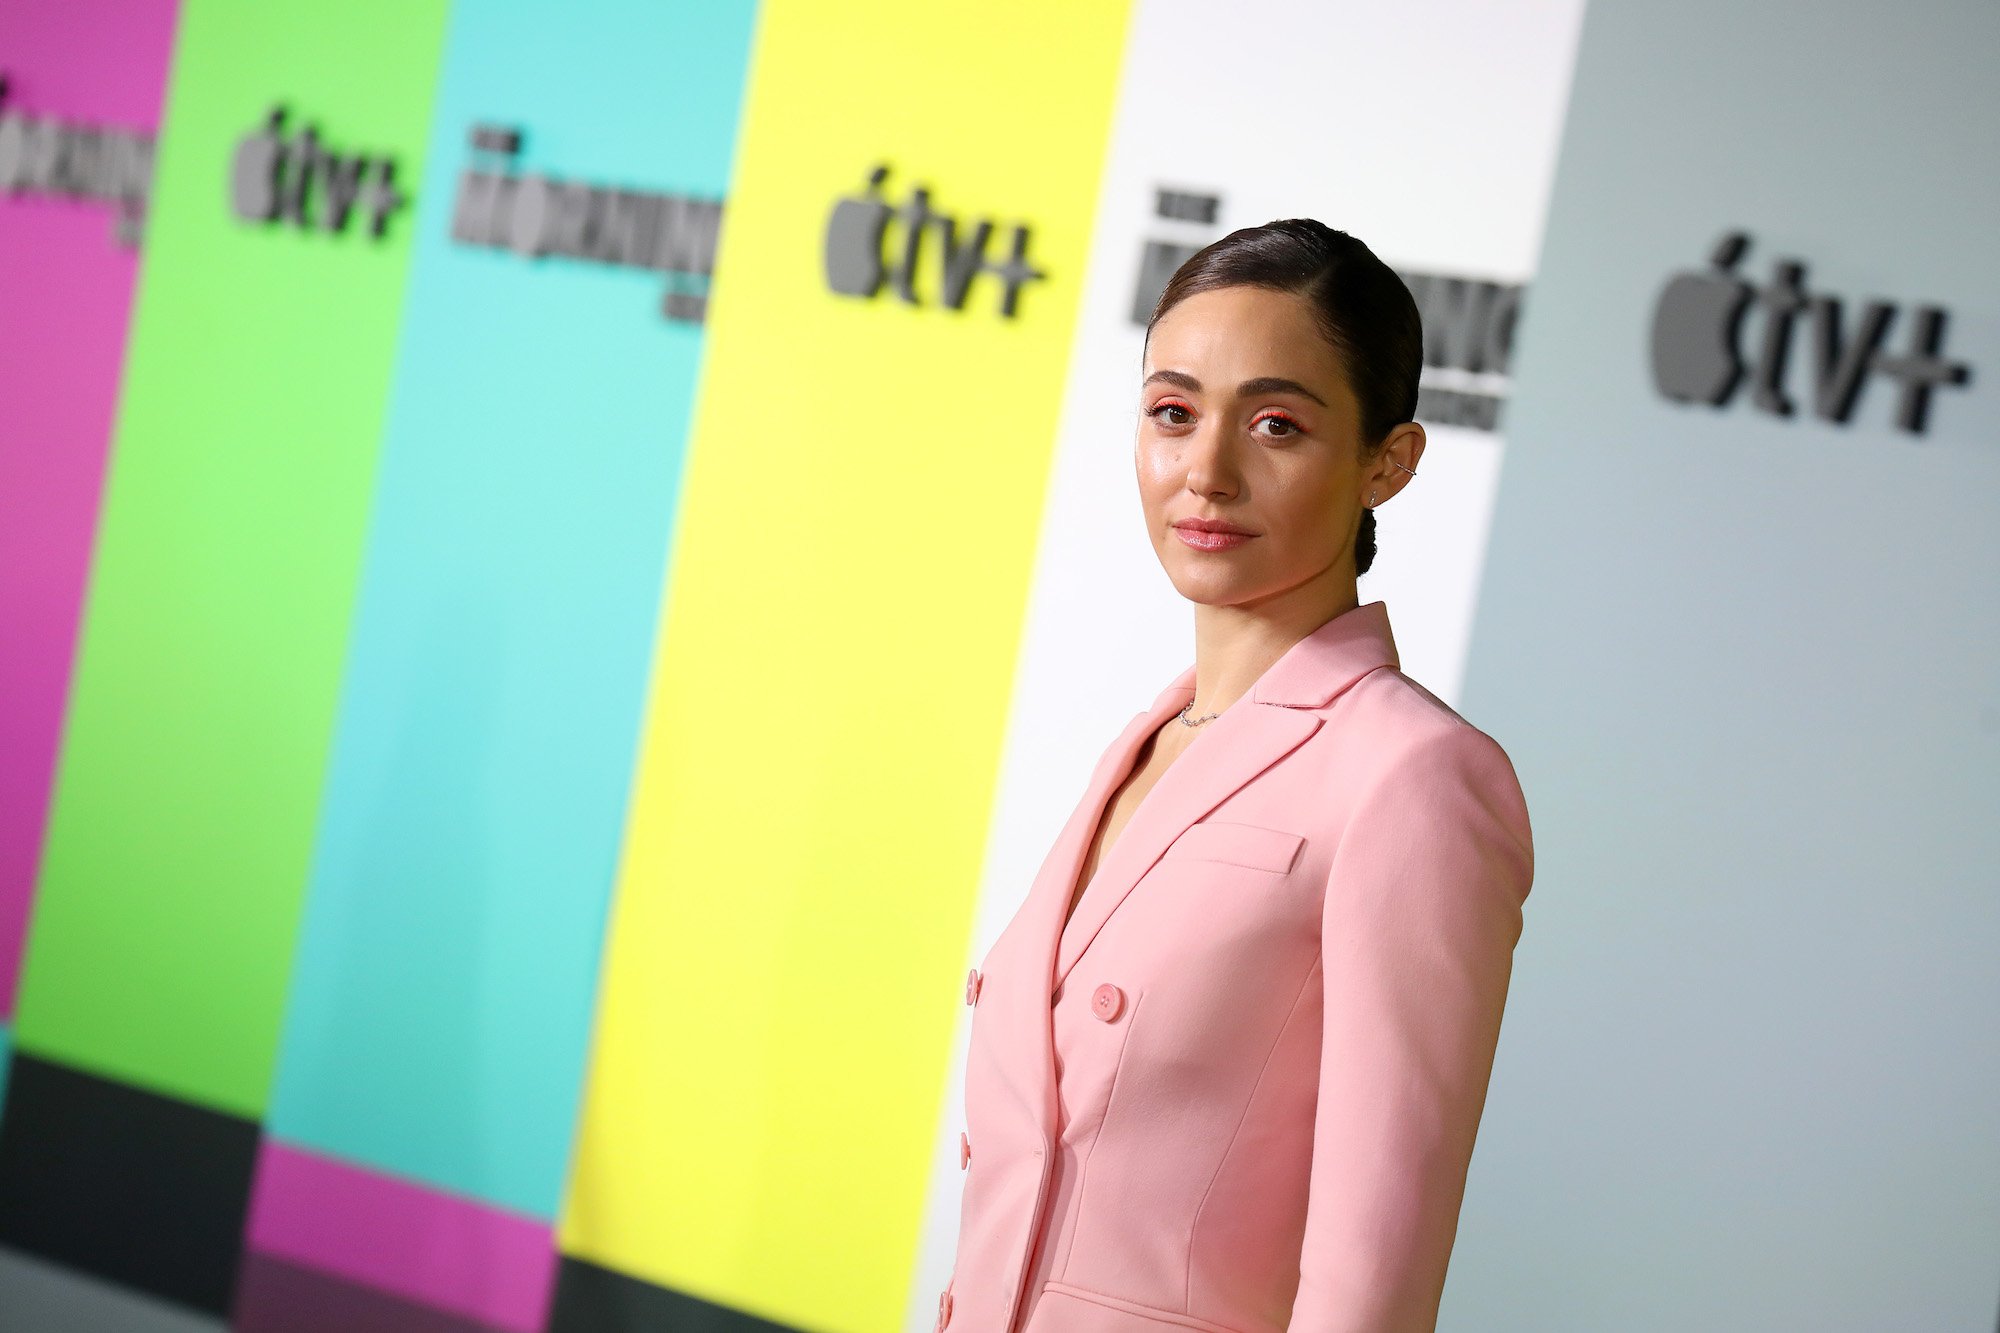 Emmy Rossum looks into camera wearing a pink blazer on an Apple TV+ red carpet